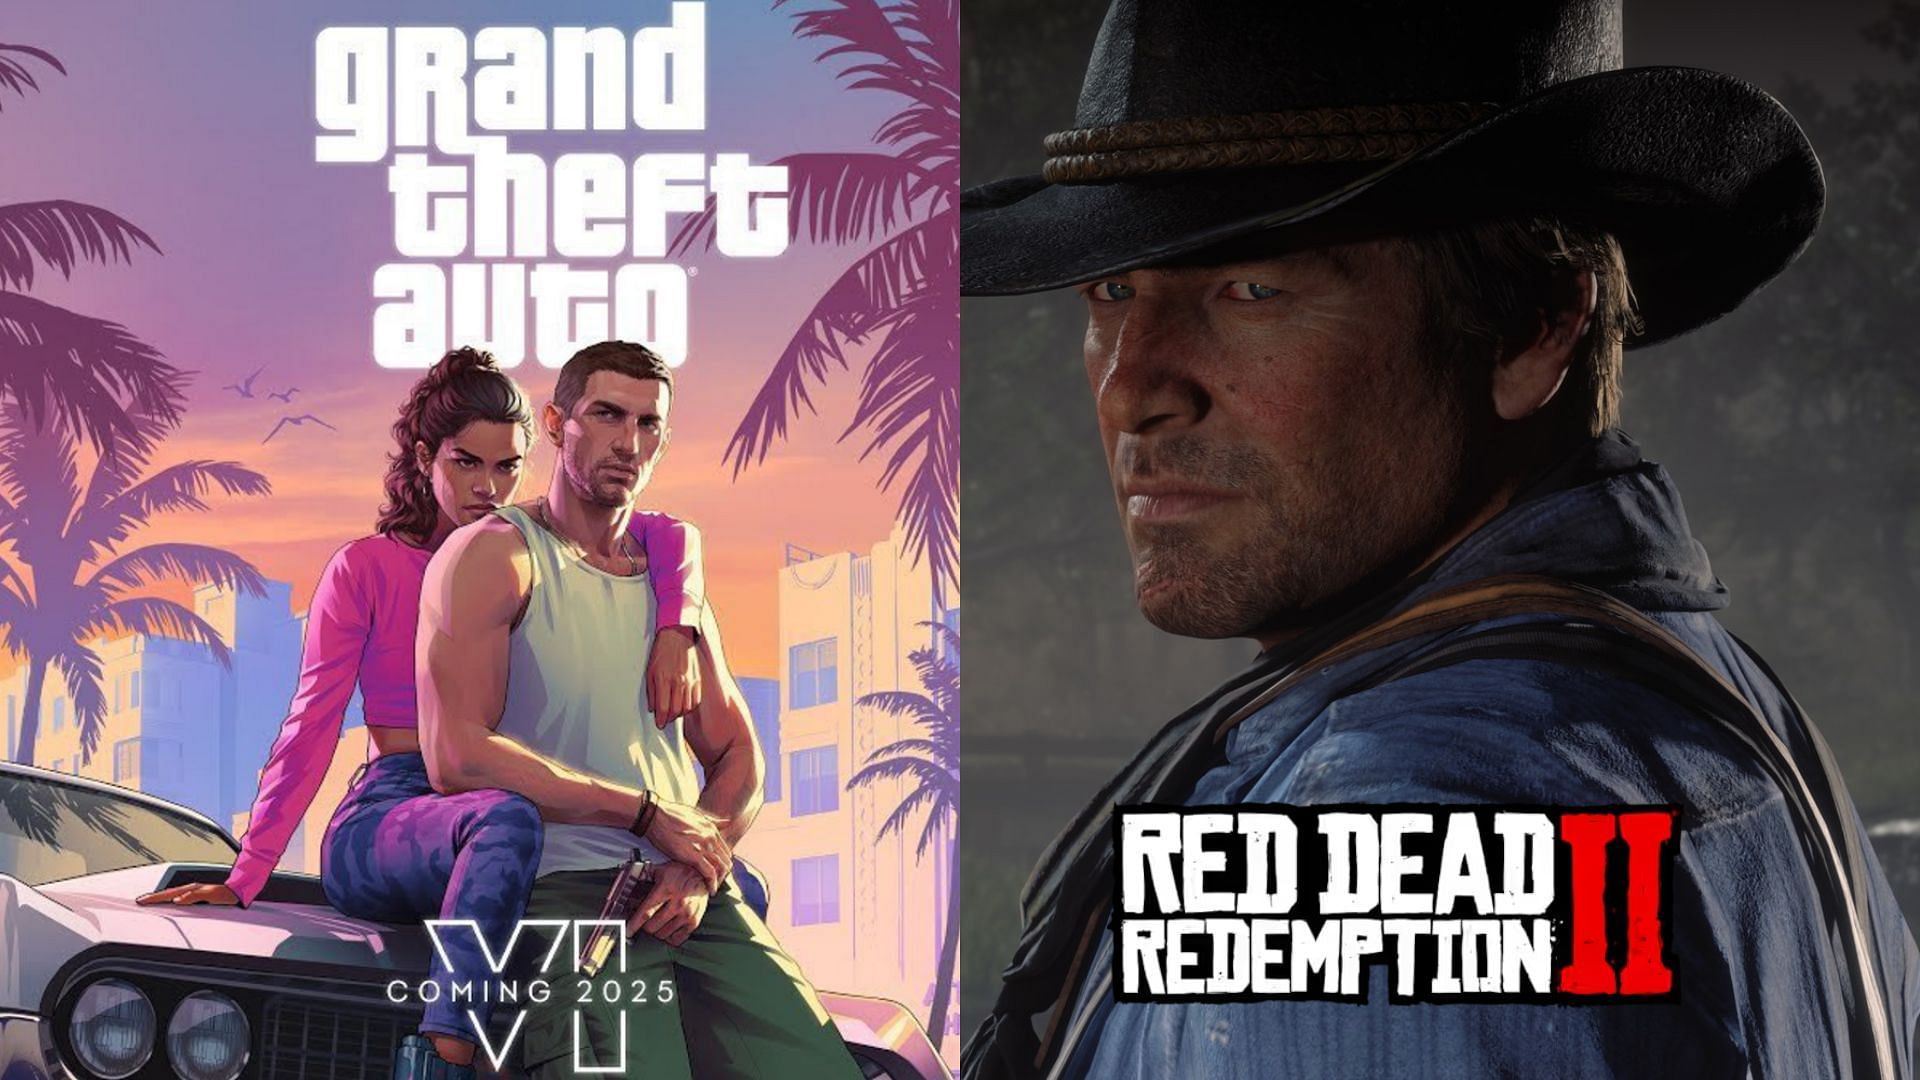 GTA 6 is expected to outperform Red Dead Redemption 2